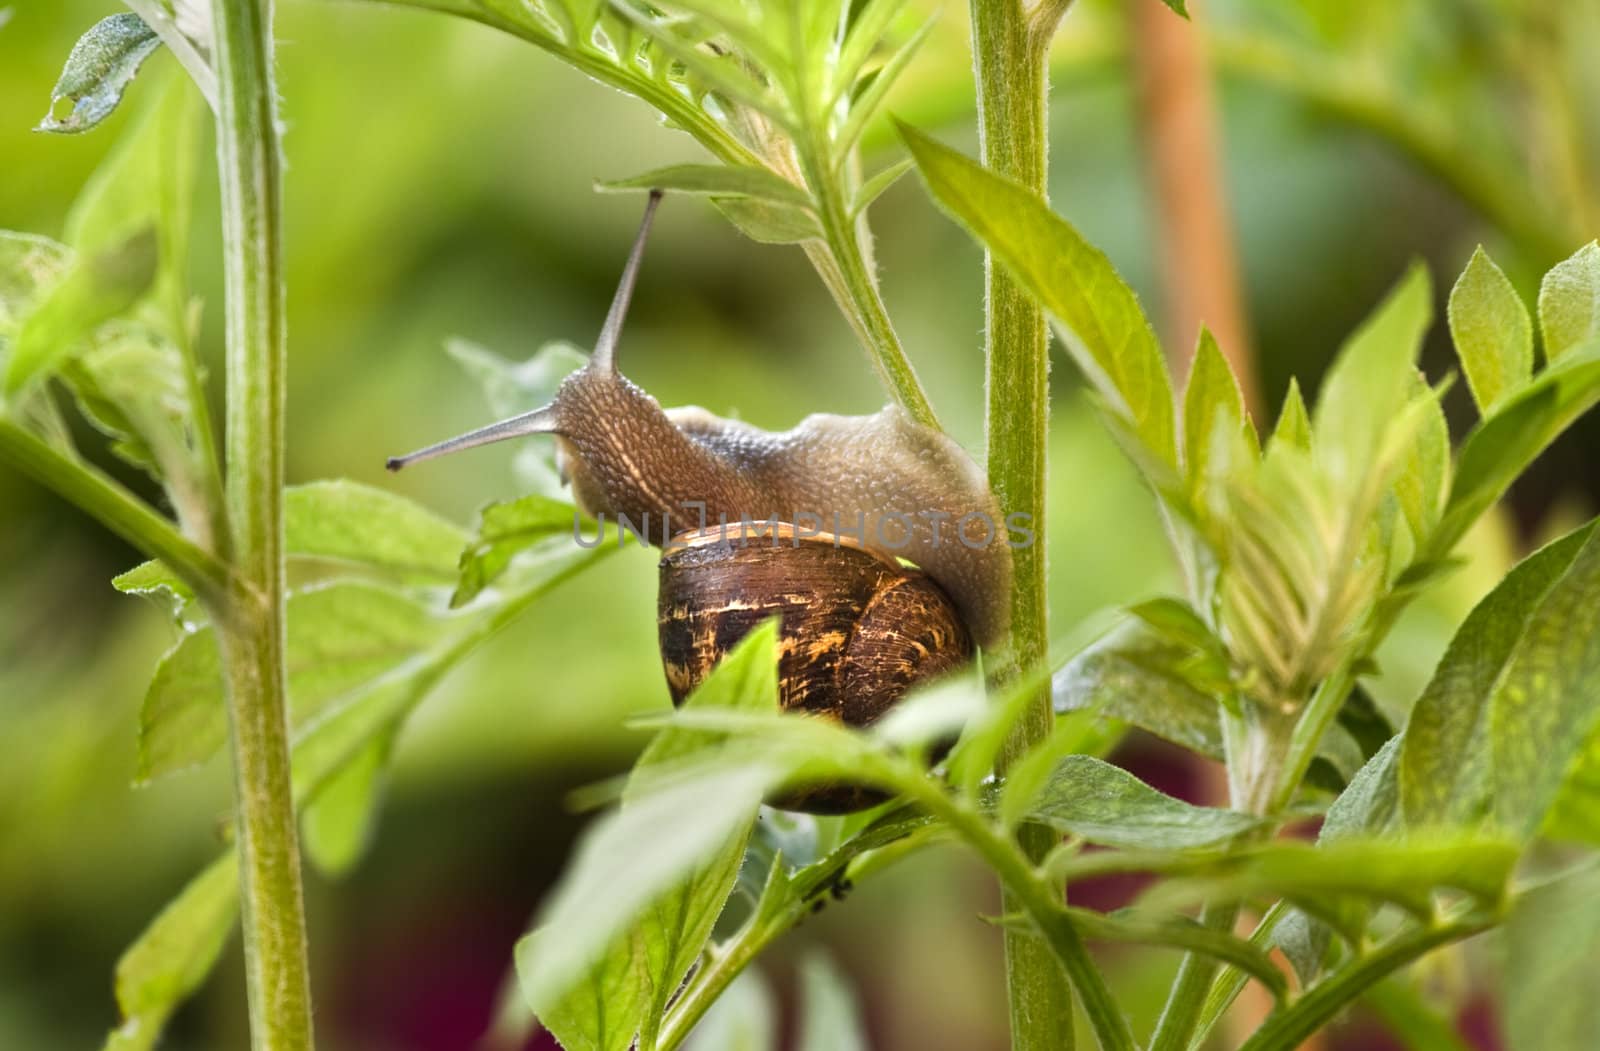 Snail eating from leaves and damaging a plant on early morning in spring